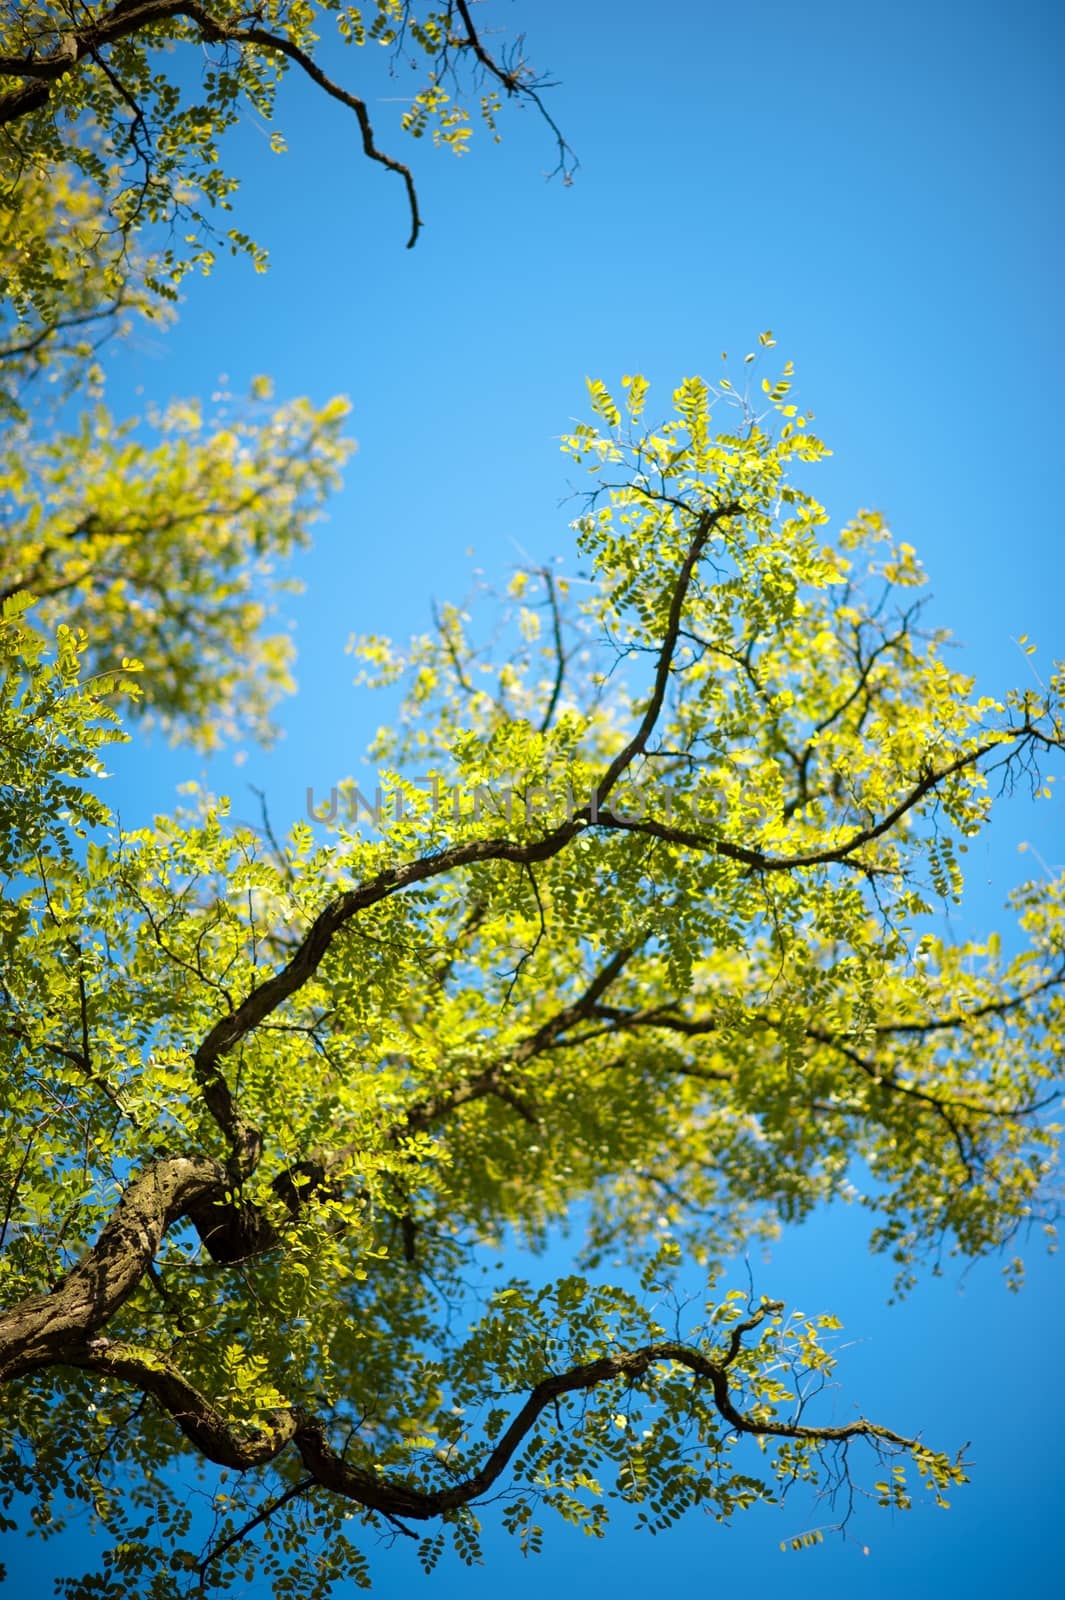 Green Spring Leafs. Spring is Coming. Juicy Green and Blue Colors of the Spring. Vertical Nature Photo.